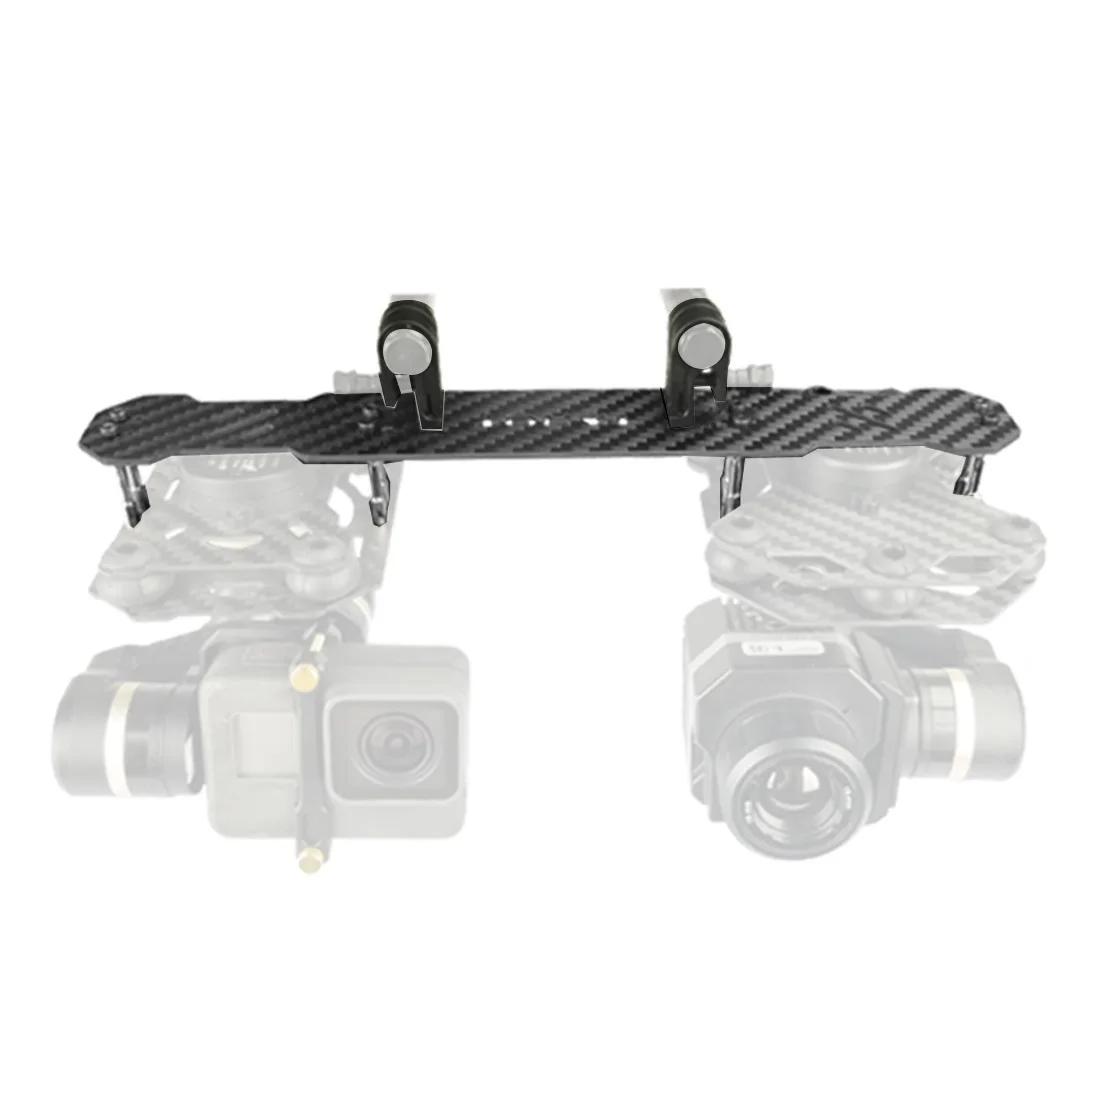 Tarot TL3T11 Metal Three-Axle Gimbal Double Mount Kit For GoPro Camera Gimbal Mount For Multi-Axle Multi-Rotor Helicopter